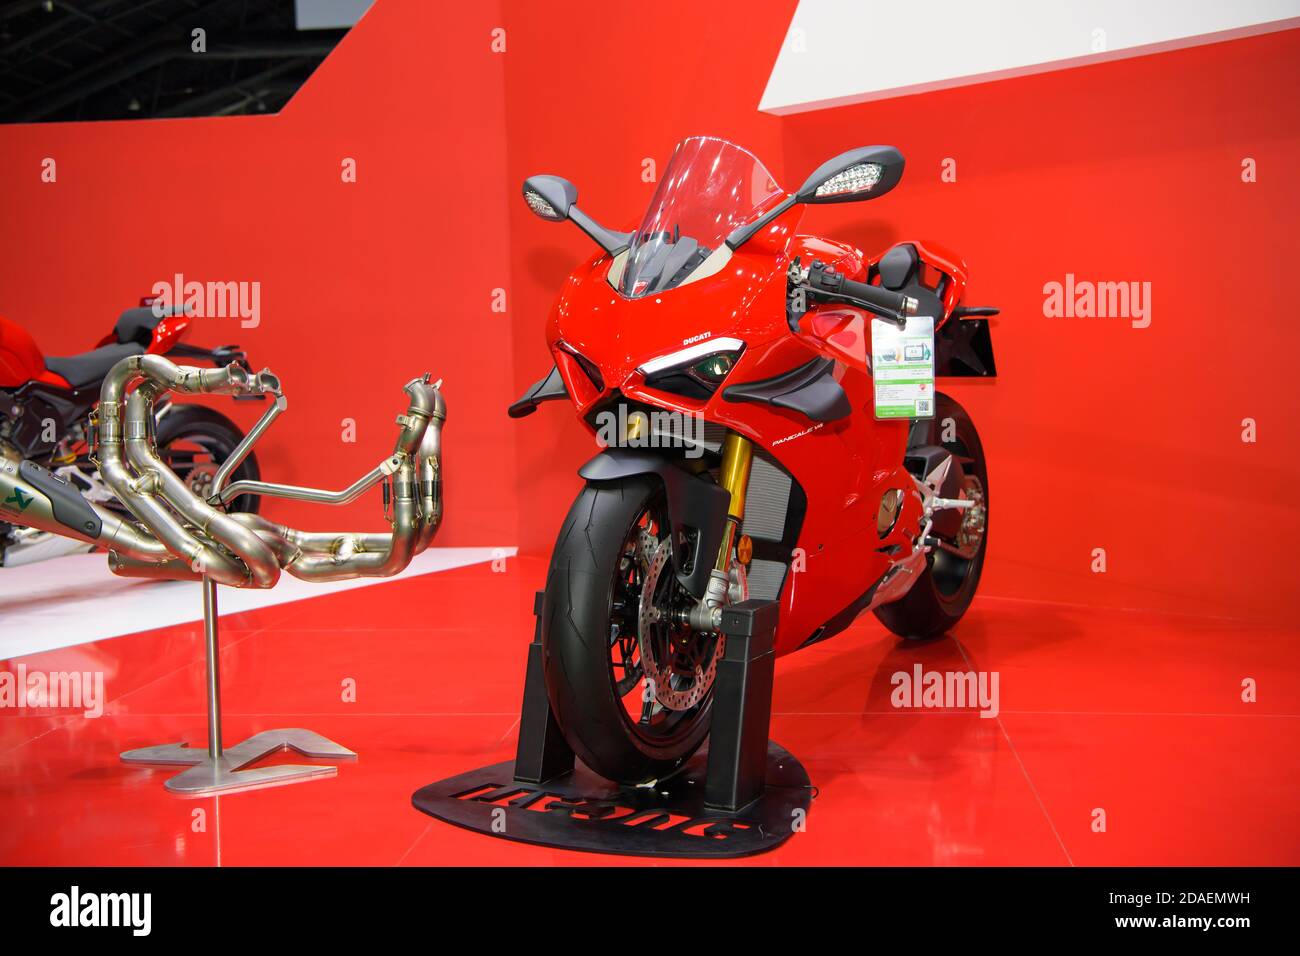 Ducati Panigale V4 Motorcycles on display at THE 41st BANGKOK INTERNATIONAL MOTOR SHOW 2020 on July 14, 2020 in Nonthaburi, Thailand. Stock Photo